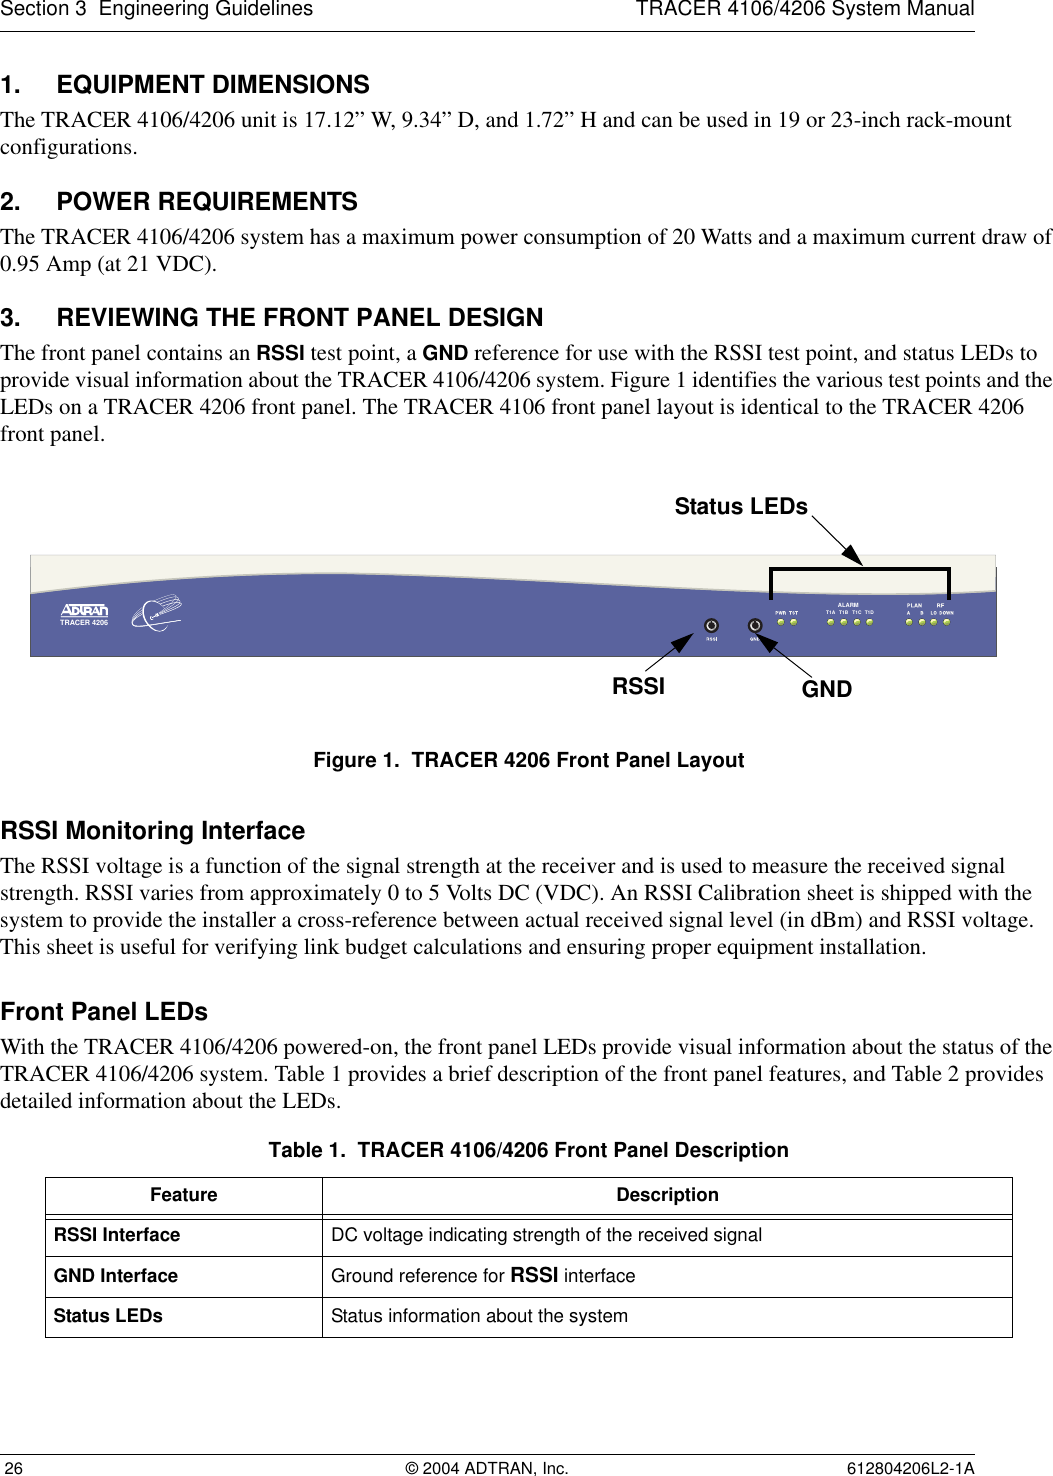 Section 3  Engineering Guidelines TRACER 4106/4206 System Manual 26 © 2004 ADTRAN, Inc. 612804206L2-1A1. EQUIPMENT DIMENSIONSThe TRACER 4106/4206 unit is 17.12” W, 9.34” D, and 1.72” H and can be used in 19 or 23-inch rack-mount configurations.2. POWER REQUIREMENTSThe TRACER 4106/4206 system has a maximum power consumption of 20 Watts and a maximum current draw of 0.95 Amp (at 21 VDC).3. REVIEWING THE FRONT PANEL DESIGNThe front panel contains an RSSI test point, a GND reference for use with the RSSI test point, and status LEDs to provide visual information about the TRACER 4106/4206 system. Figure 1 identifies the various test points and the LEDs on a TRACER 4206 front panel. The TRACER 4106 front panel layout is identical to the TRACER 4206 front panel.Figure 1.  TRACER 4206 Front Panel LayoutRSSI Monitoring InterfaceThe RSSI voltage is a function of the signal strength at the receiver and is used to measure the received signal strength. RSSI varies from approximately 0 to 5 Volts DC (VDC). An RSSI Calibration sheet is shipped with the system to provide the installer a cross-reference between actual received signal level (in dBm) and RSSI voltage. This sheet is useful for verifying link budget calculations and ensuring proper equipment installation.Front Panel LEDsWith the TRACER 4106/4206 powered-on, the front panel LEDs provide visual information about the status of the TRACER 4106/4206 system. Table 1 provides a brief description of the front panel features, and Table 2 provides detailed information about the LEDs. Table 1.  TRACER 4106/4206 Front Panel DescriptionFeature DescriptionRSSI Interface DC voltage indicating strength of the received signalGND Interface Ground reference for RSSI interfaceStatus LEDs Status information about the systemALARMT1A T1B T1C T1DTRACER 4206Status LEDsRSSI GND